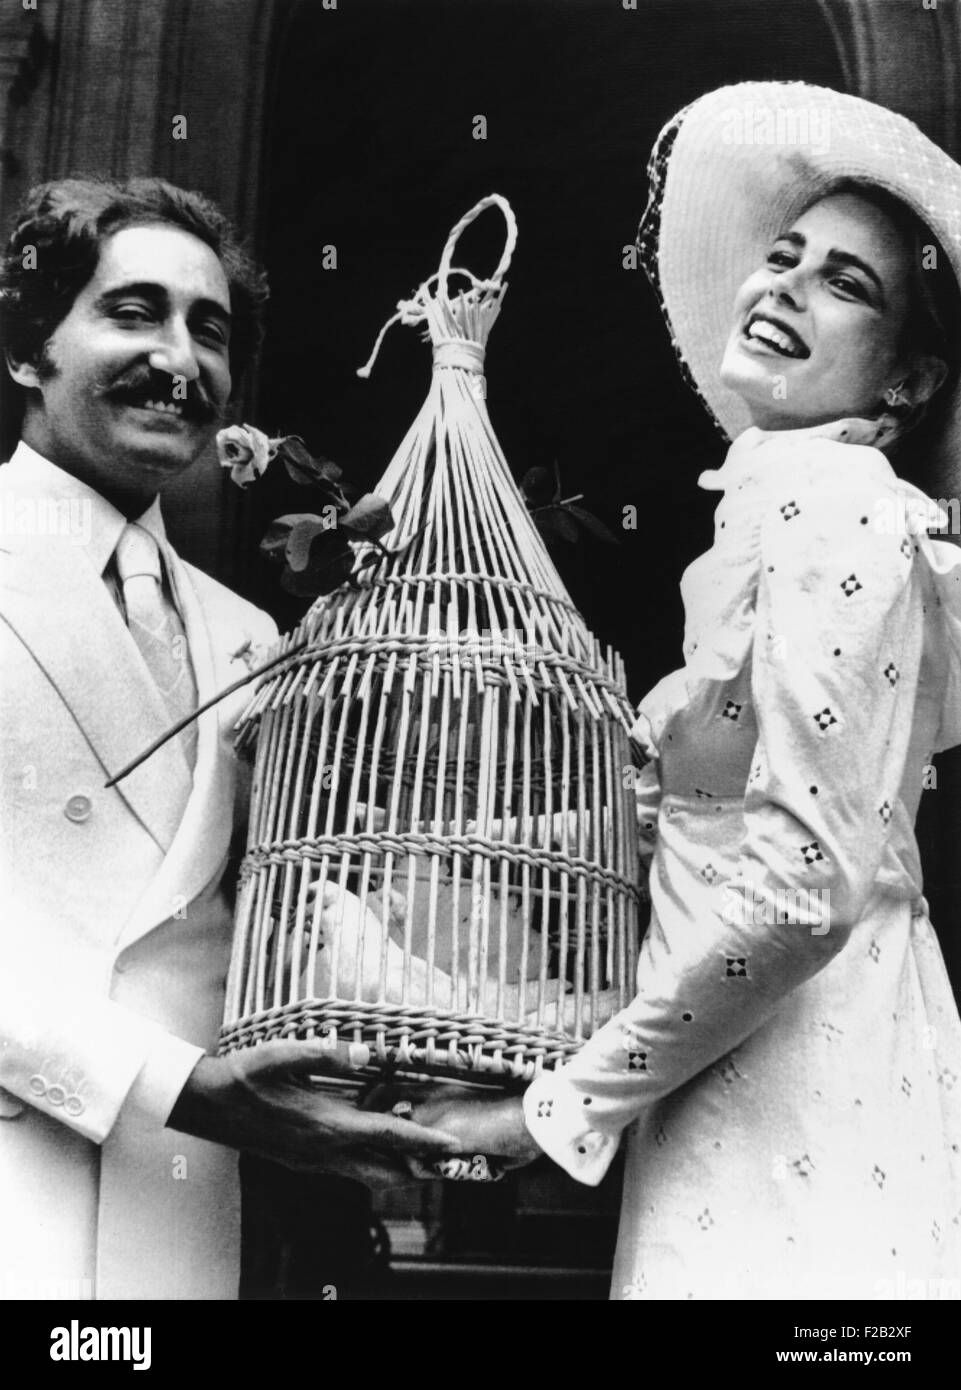 Margot Hemingway marries Errol Whitson, in Paris June 21, 1975. The top model and aspiring actress was the granddaughter of novelist Ernest Hemingway. The couple posed with two caged doves after their wedding. (CSU 2015 7 307) Stock Photo